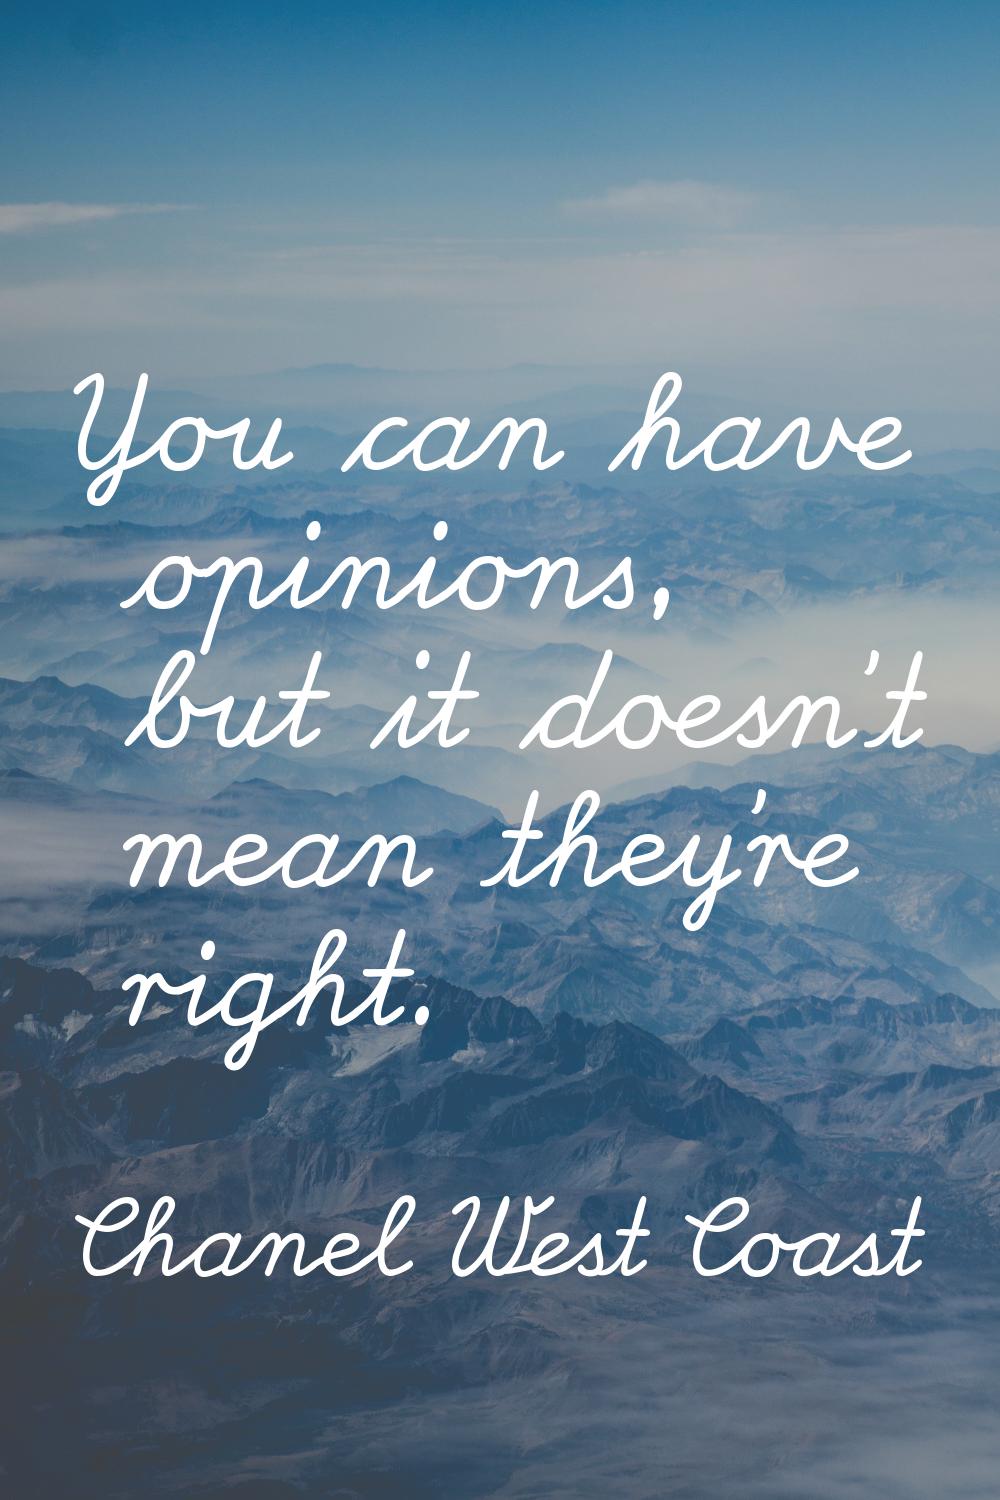 You can have opinions, but it doesn't mean they're right.